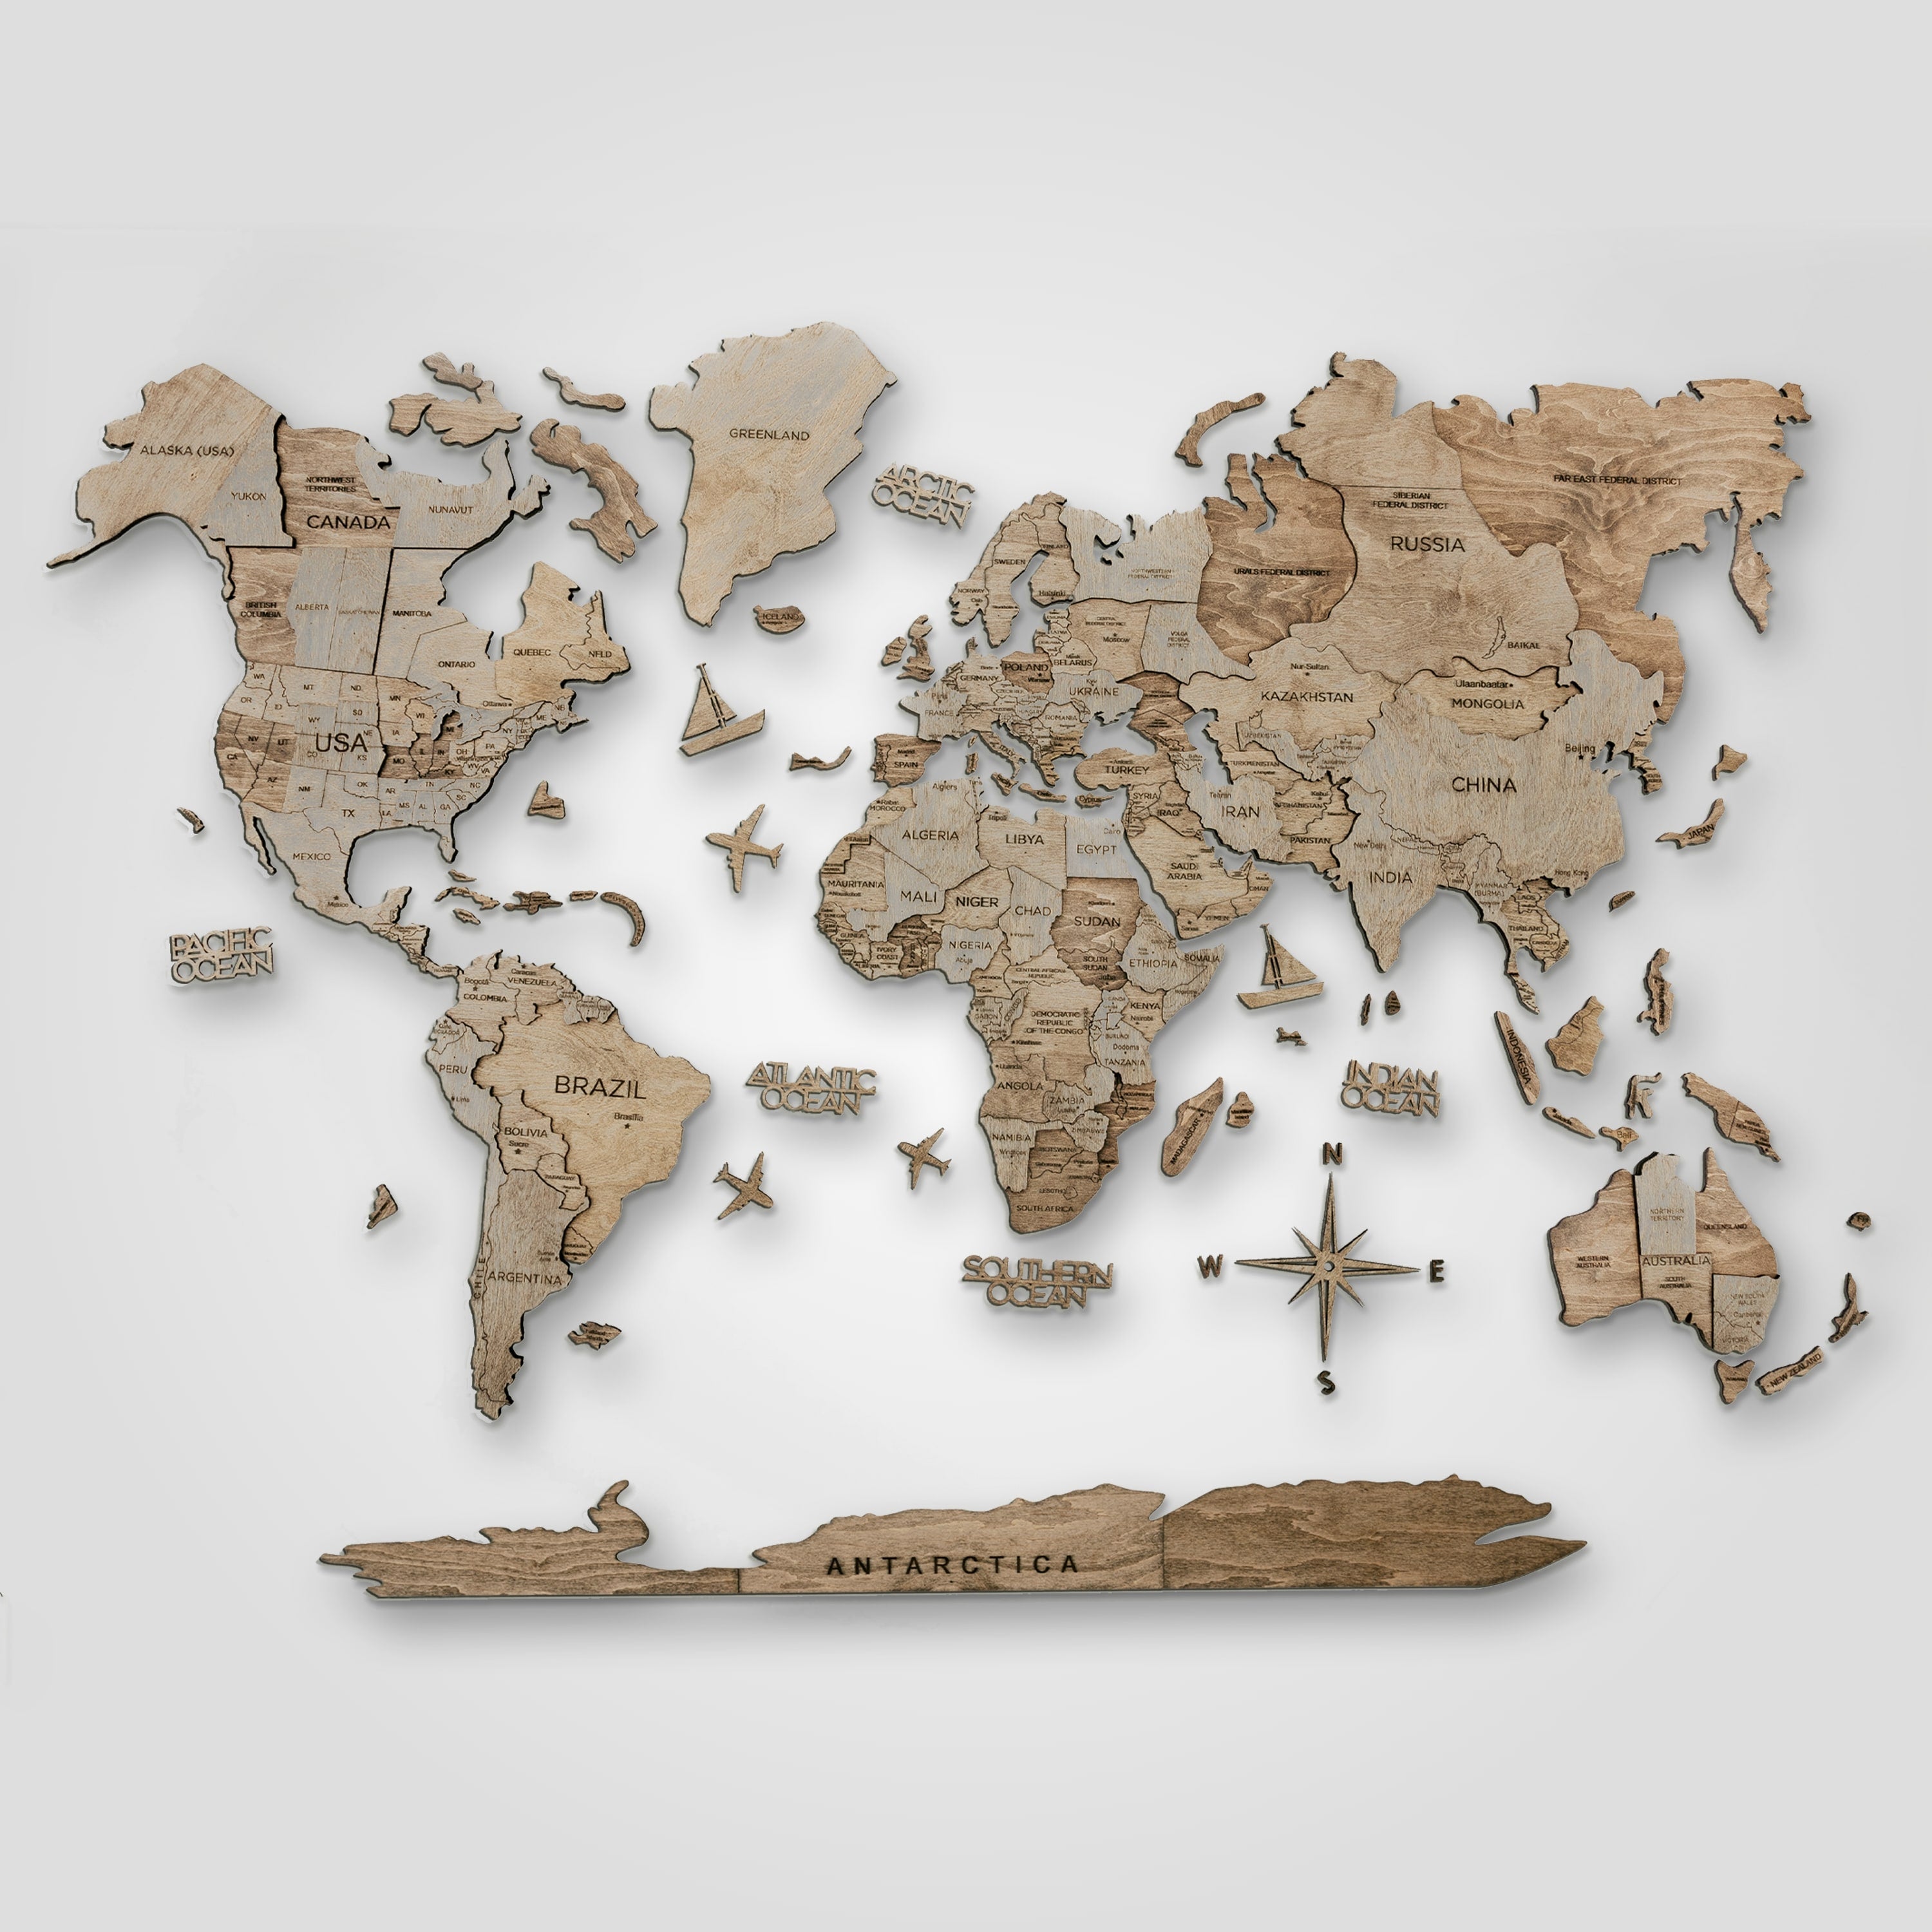 3D Wooden World Map Colorful